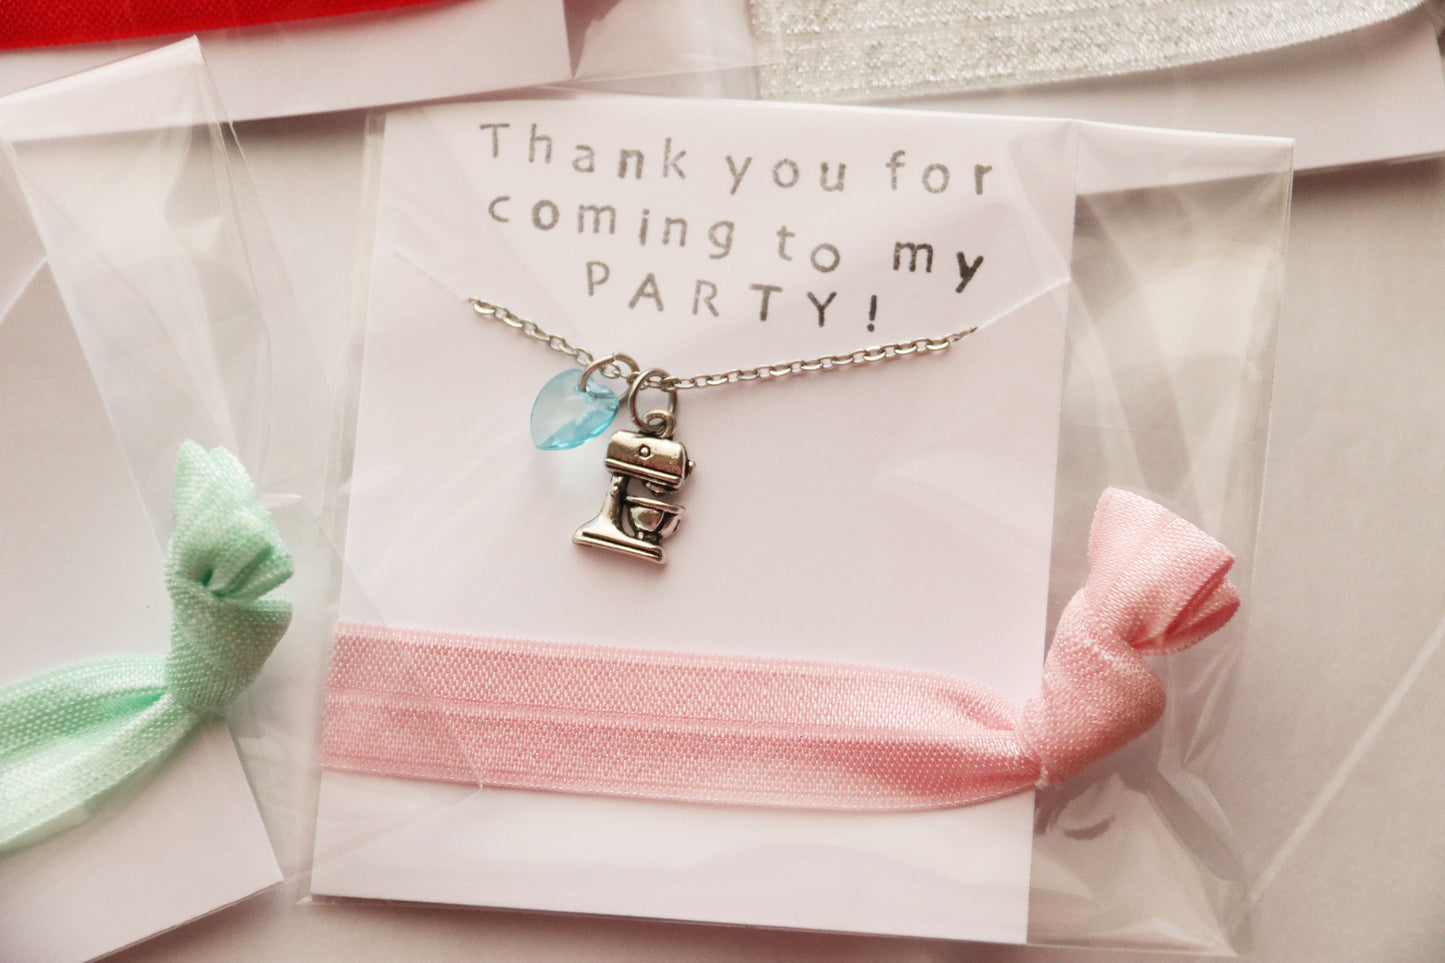 Baking Party Favor Necklace with Hair Tie, Cooking Party Favor, Cupcake Party Favor, Party Favors